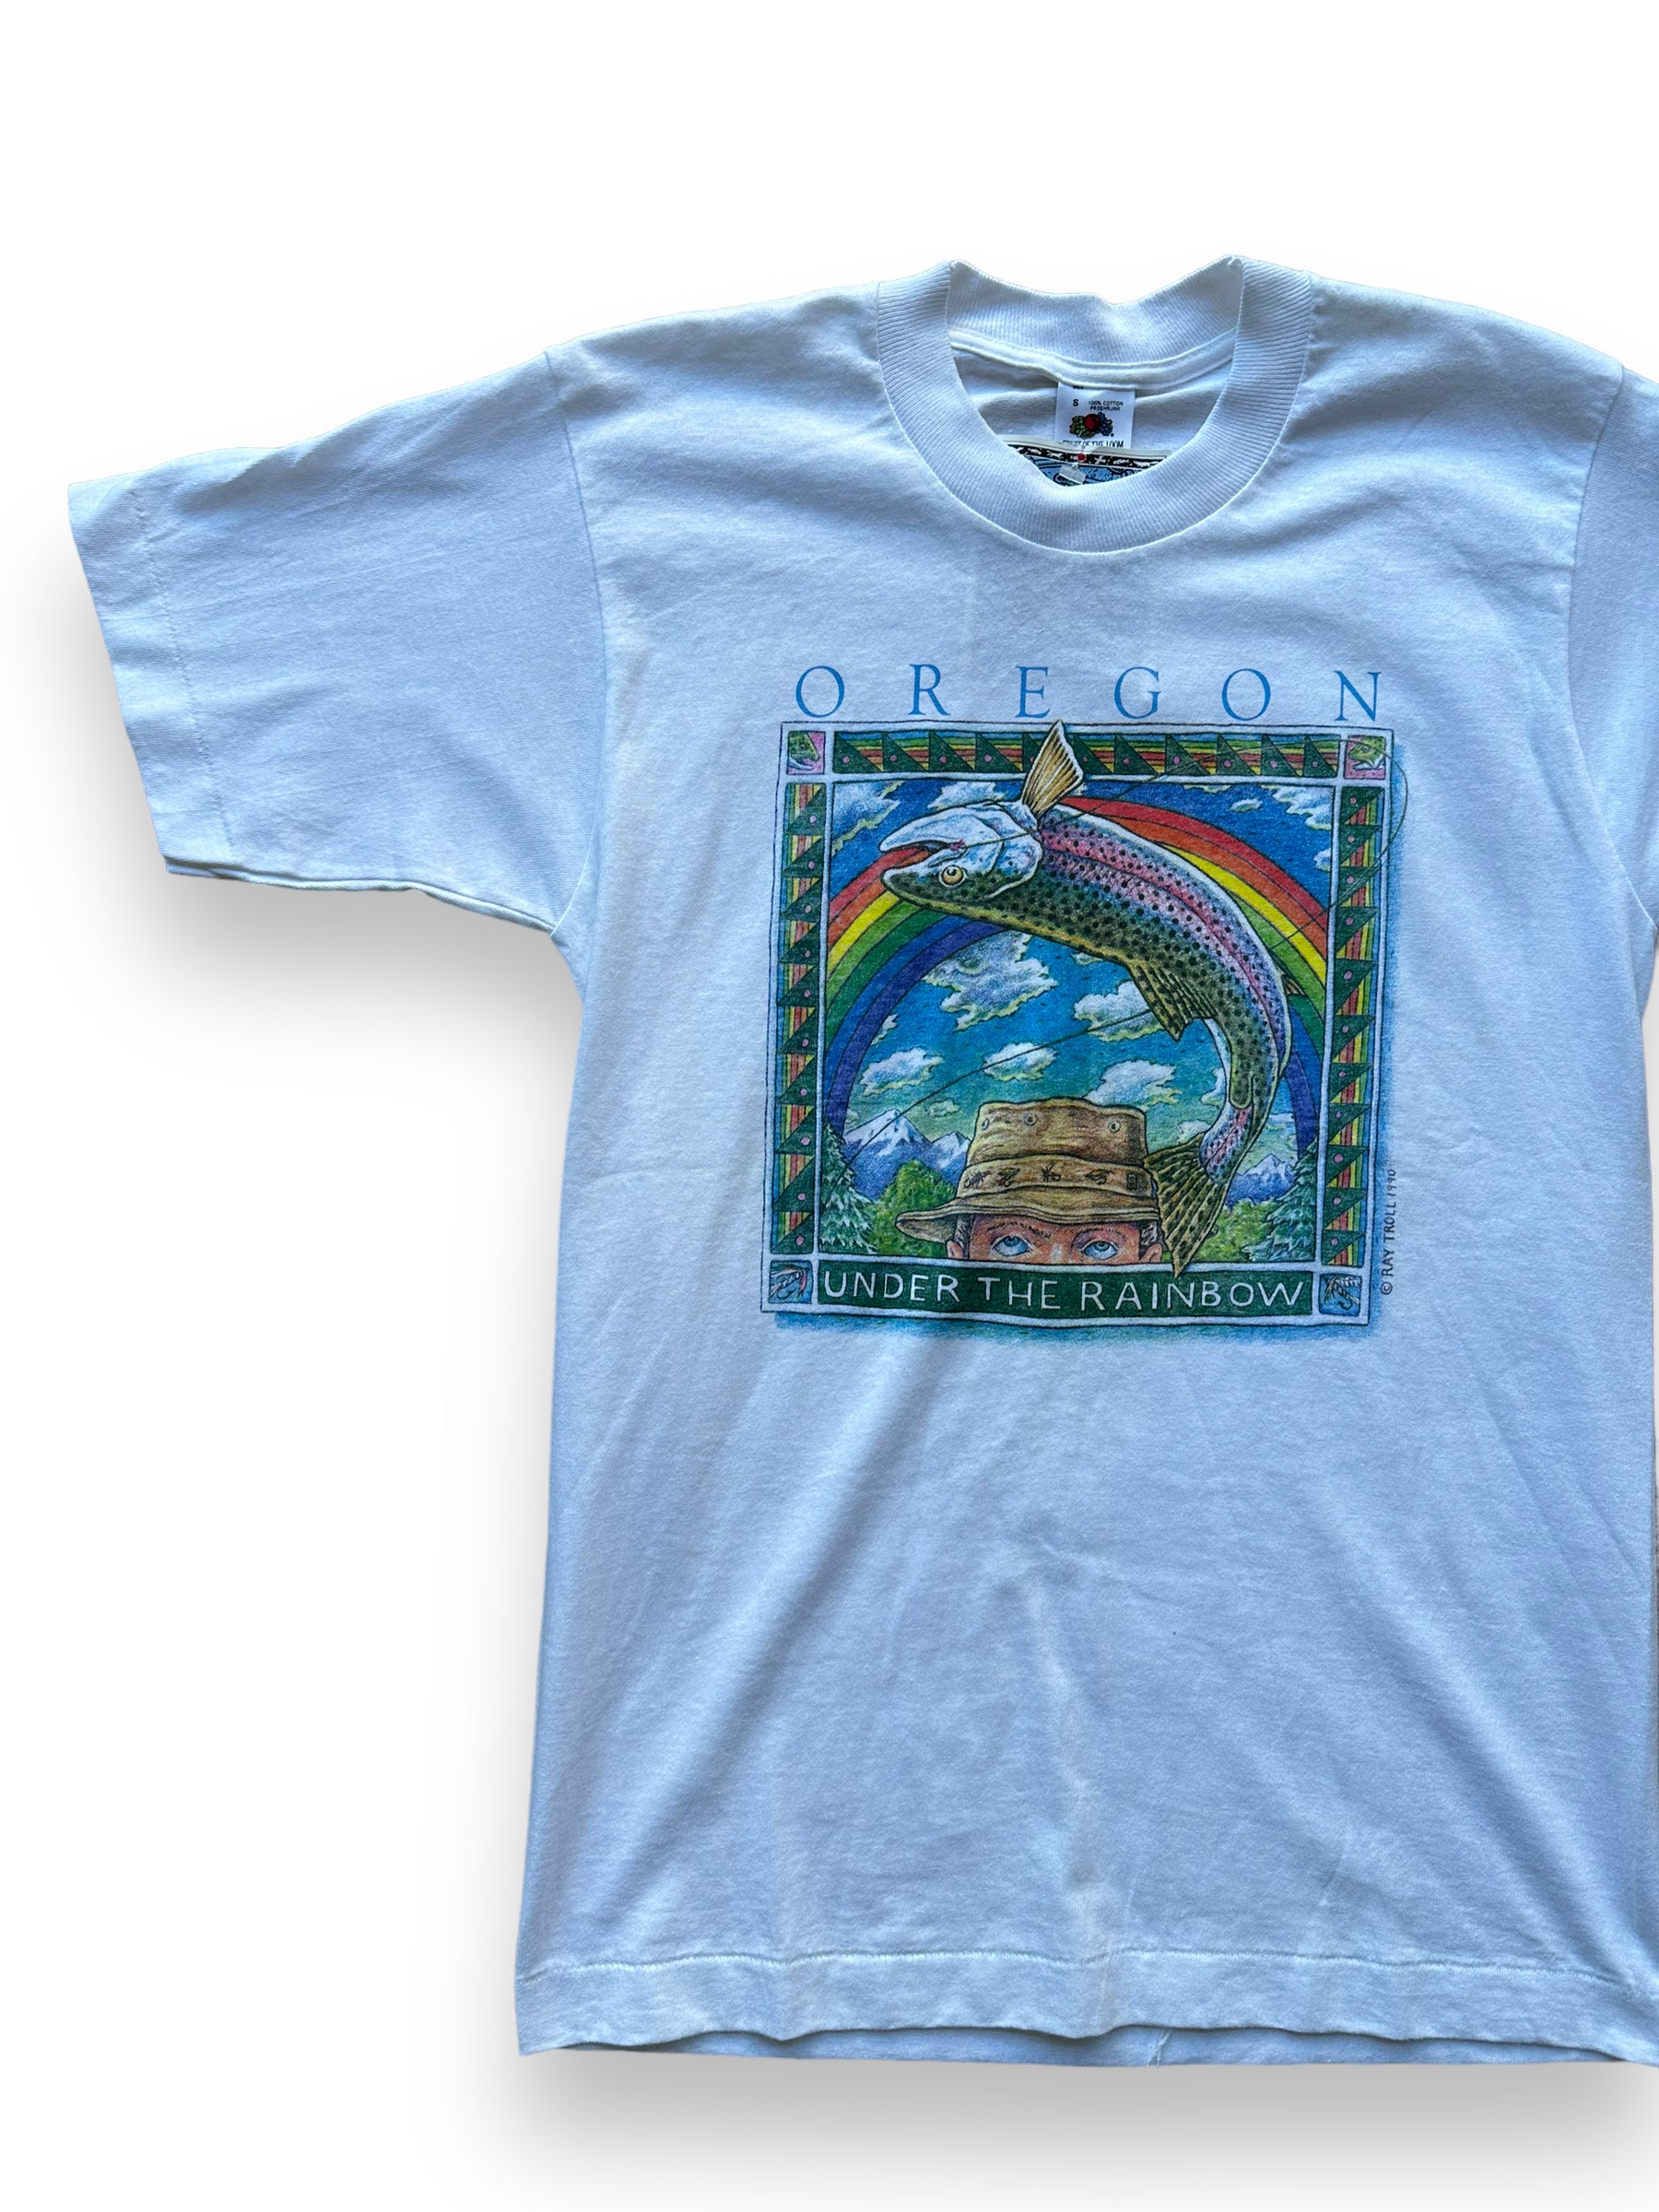 Front right of Vintage Ray Troll Deadstock Oregon "Under the Rainbow" Tee SZ S |  Vintage Fishing Tee Seattle | Barn Owl Vintage